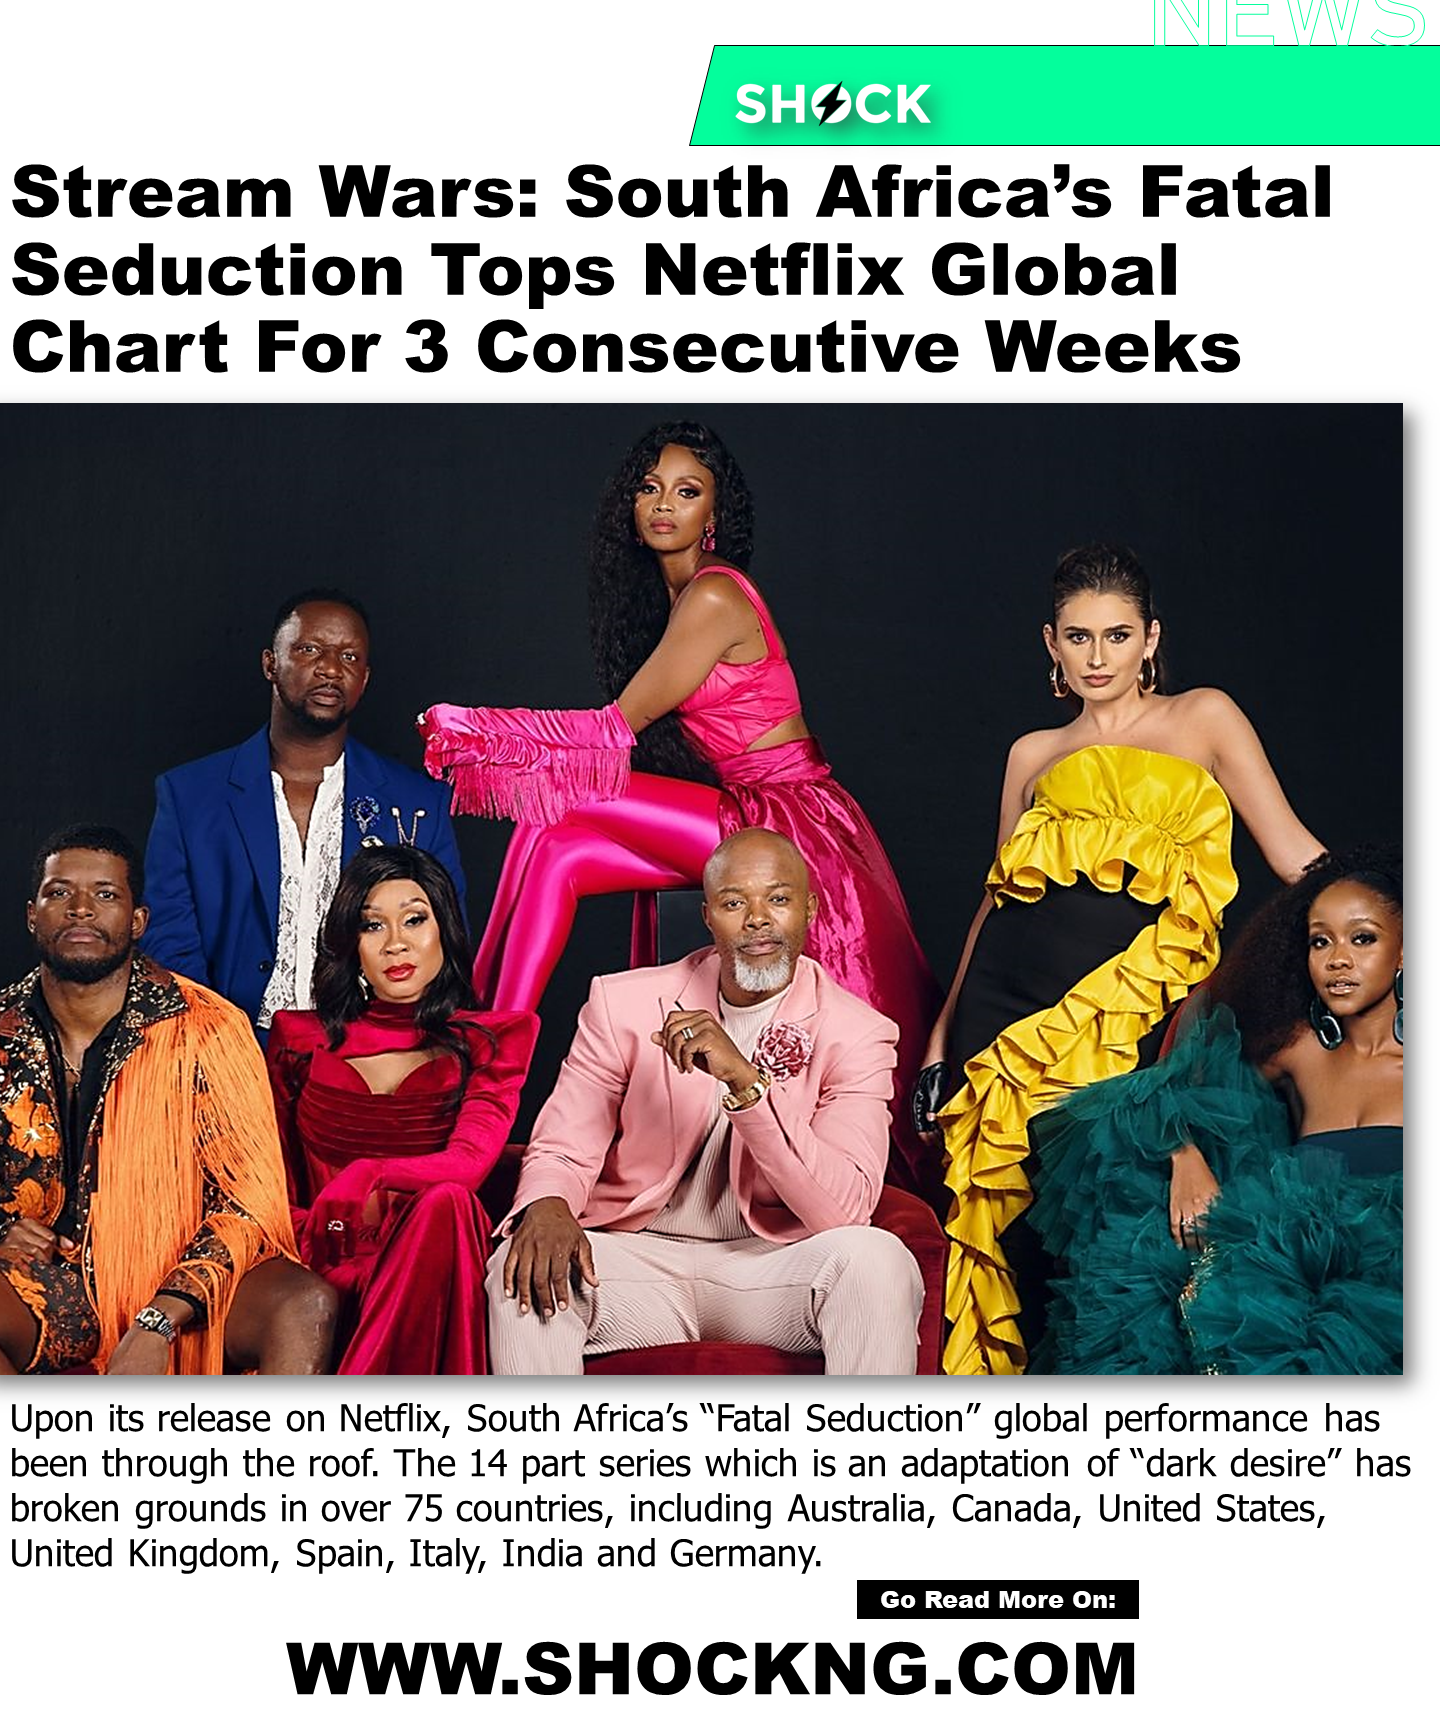 South Africa fatal seduction series - South Africa’s Fatal Seduction Tops Netflix Global Chart For 3 Consecutive Weeks